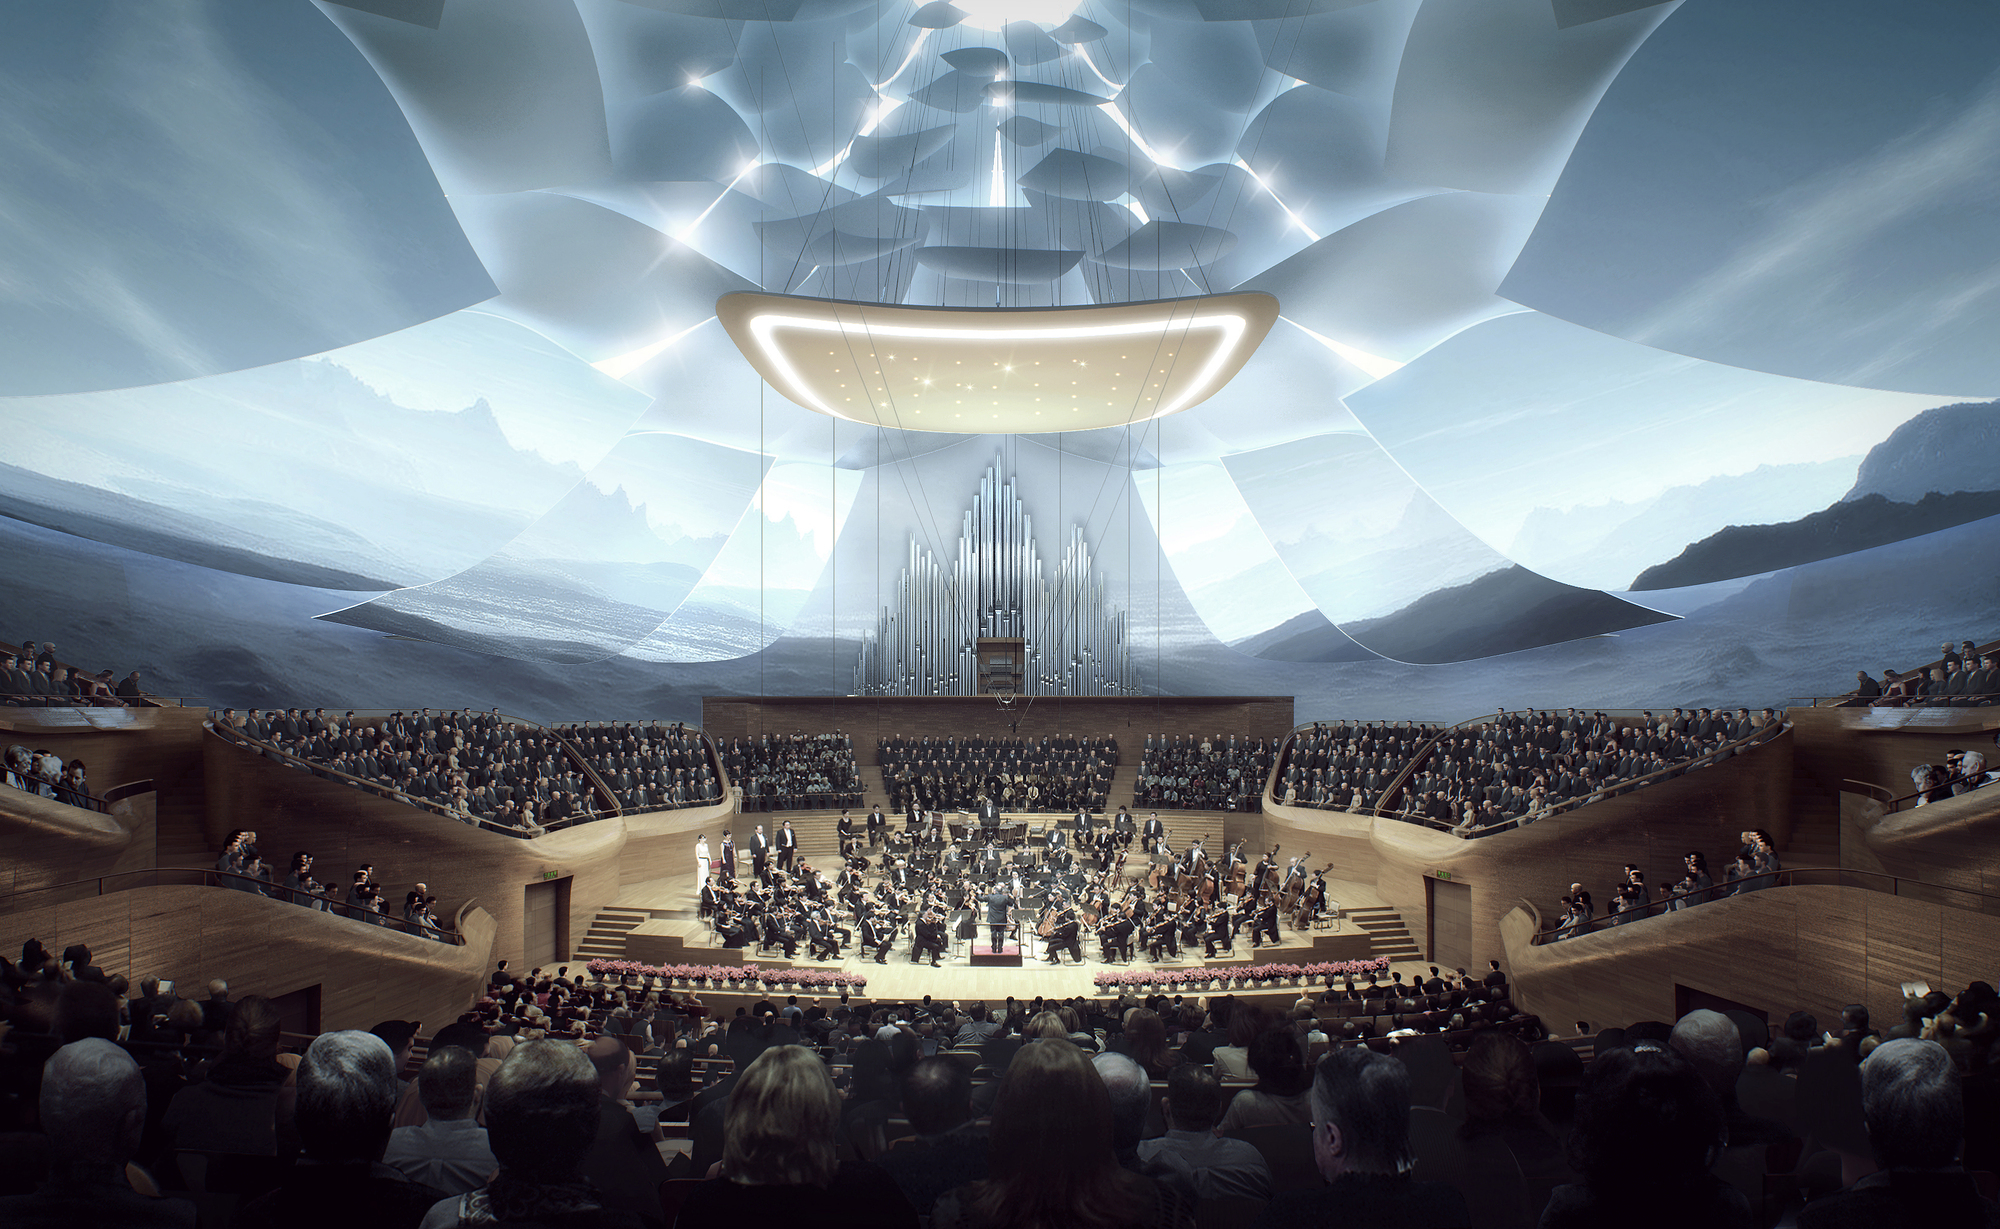 The concert hall is seen from the point of view of the audience seats